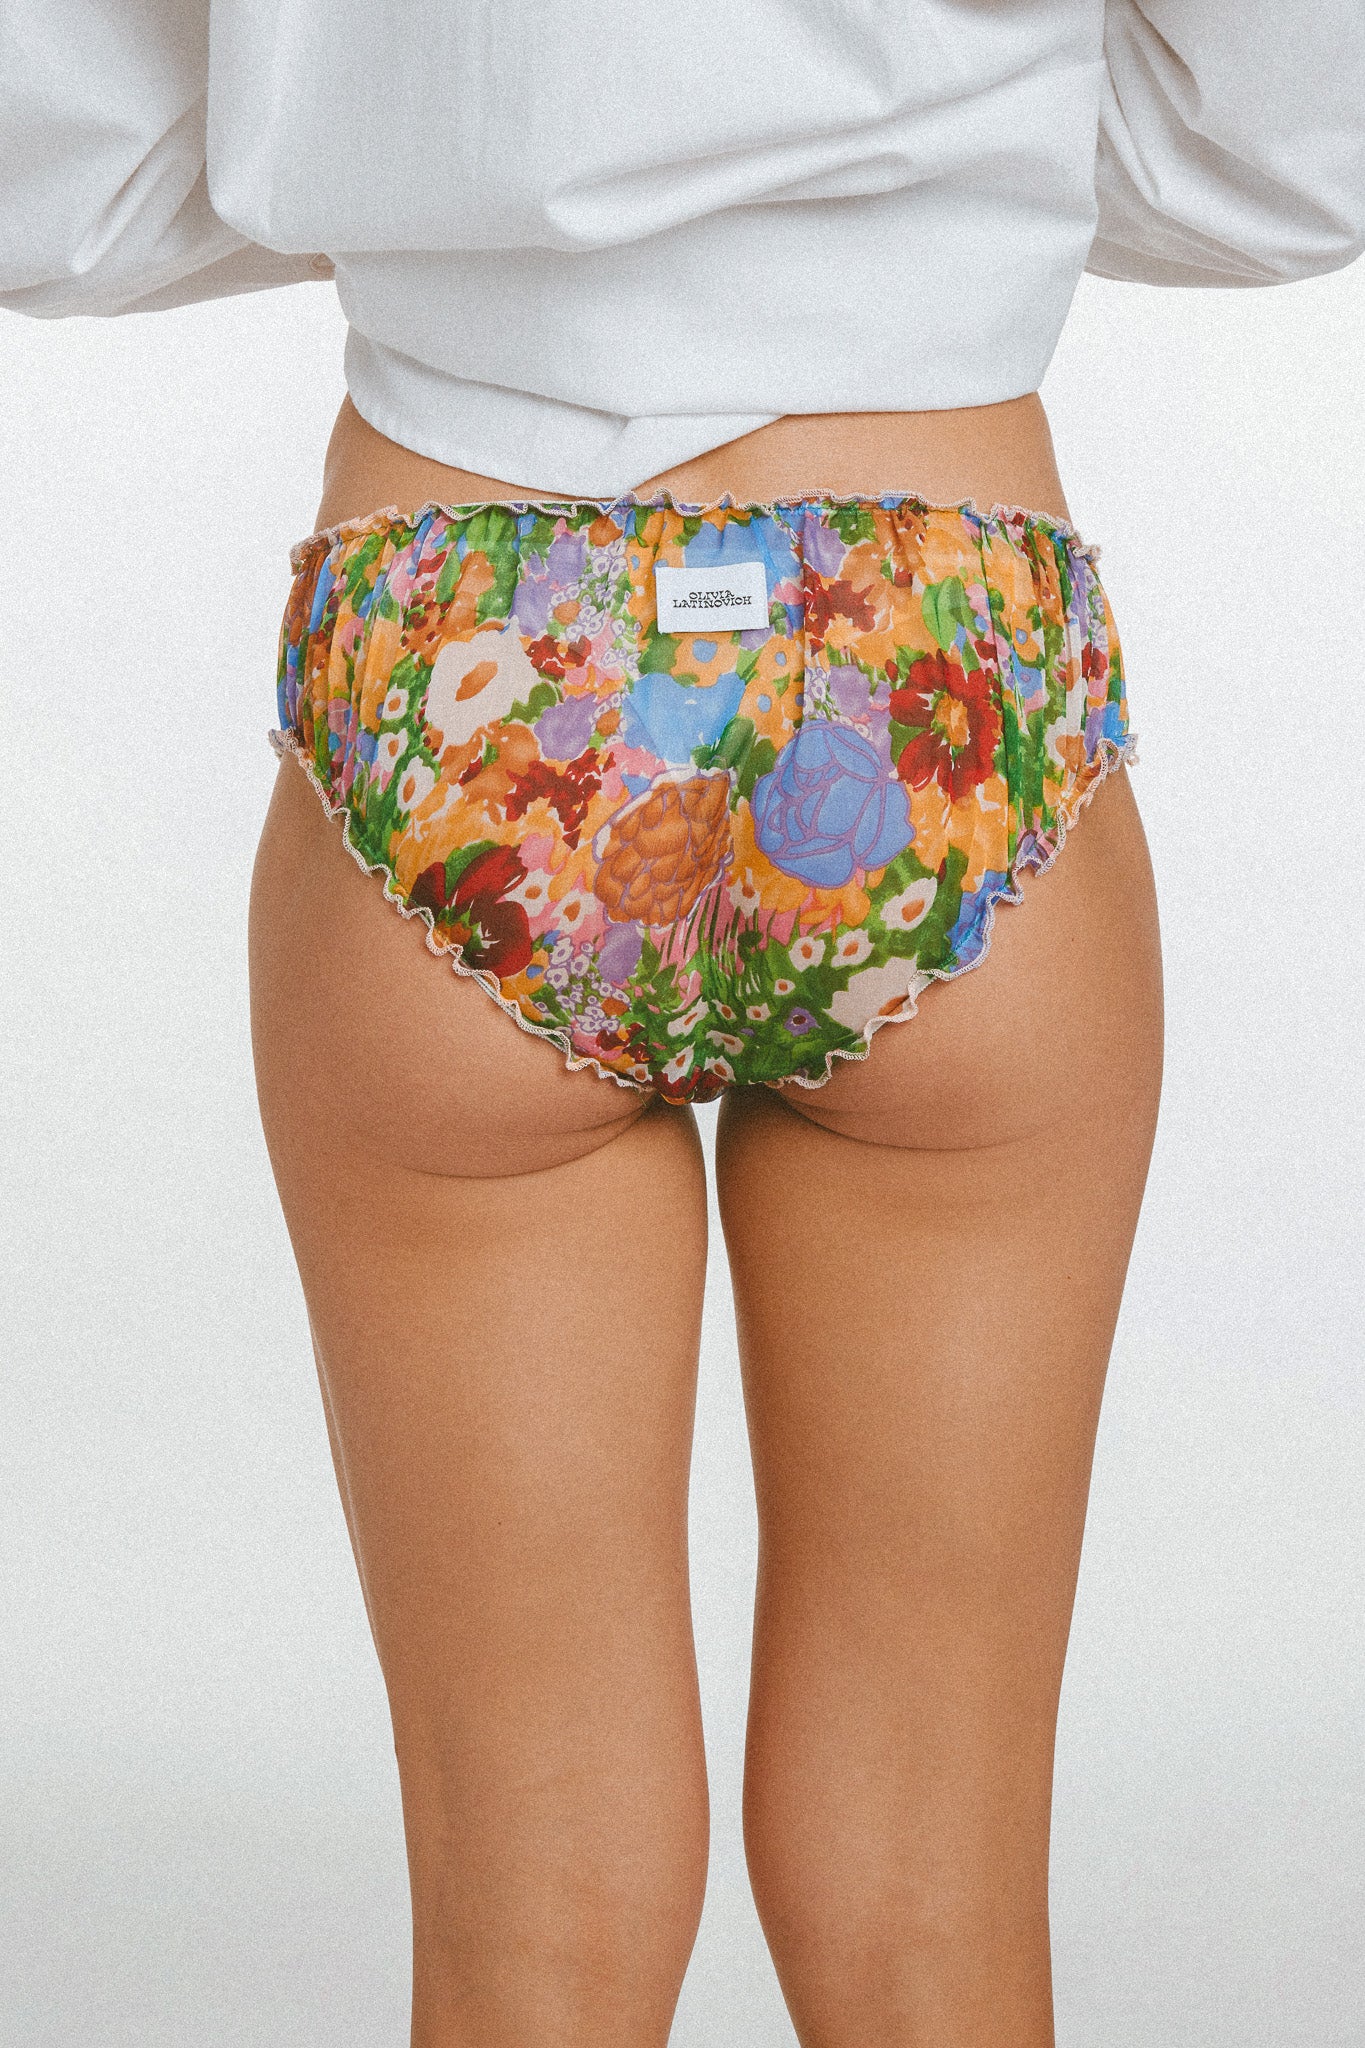 BLOOMERS FLORAL MULTI